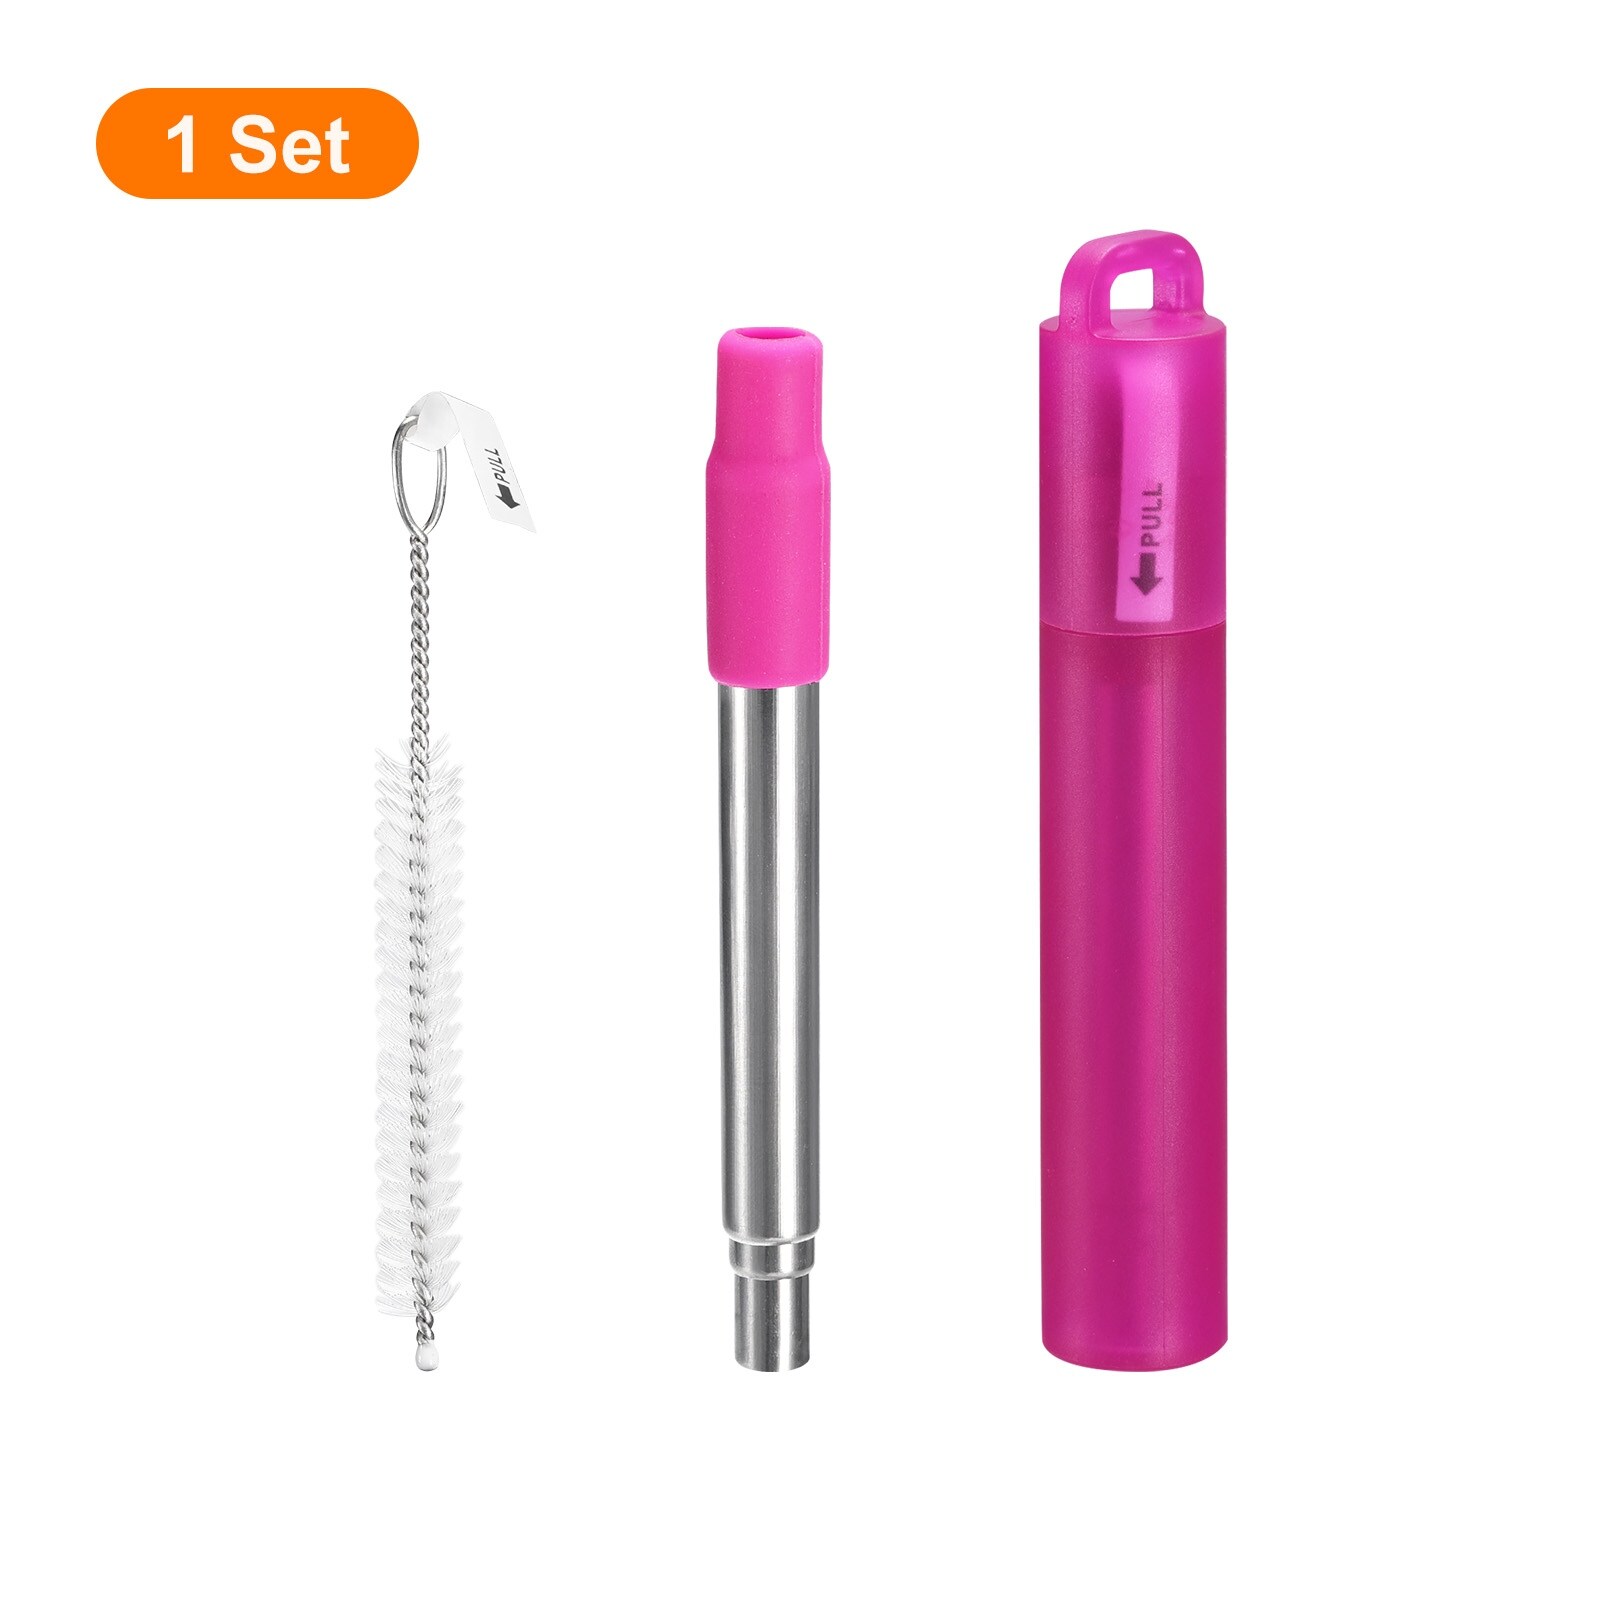 https://ak1.ostkcdn.com/images/products/is/images/direct/6a6d03a1c631995d4b6f4e383c1dfae5ab41a0f6/1-Set-Reusable-Telescopic-Stainless-Steel-Straws-with-Silicone-Nozzle.jpg